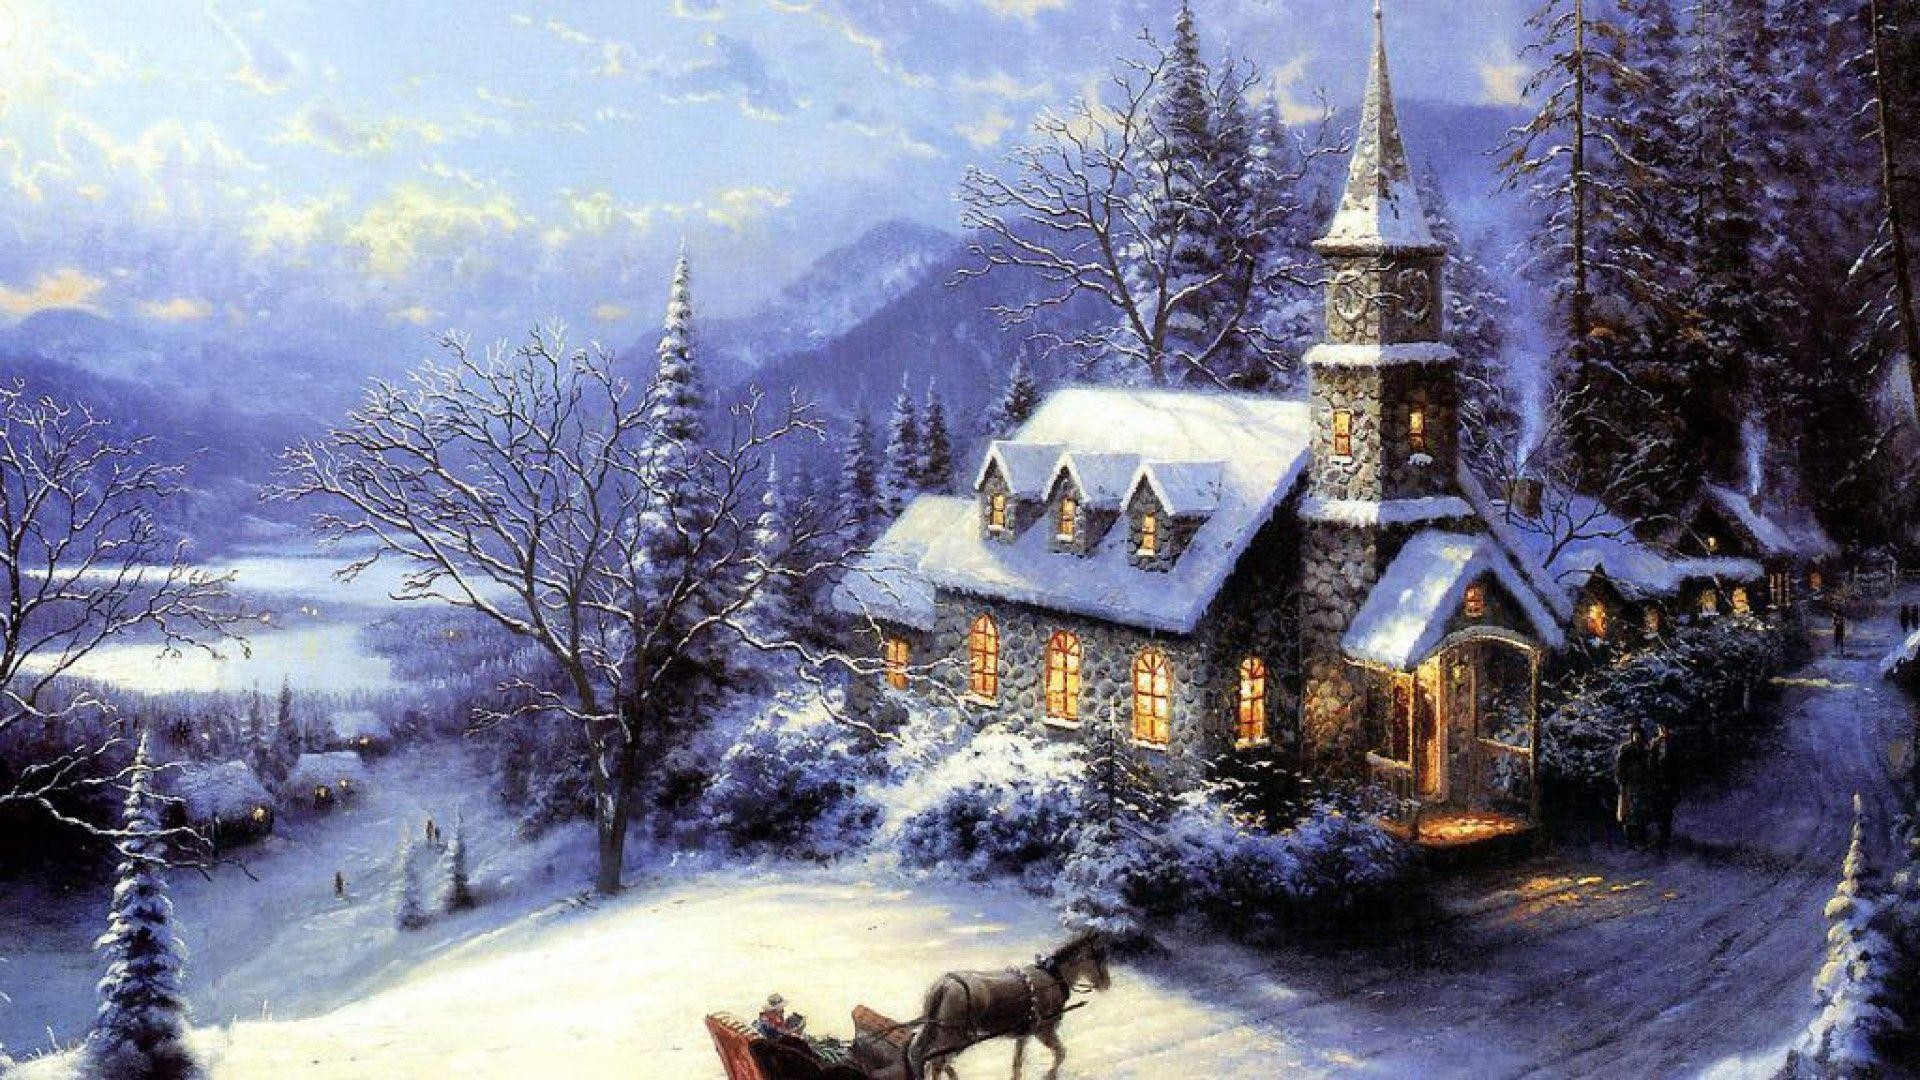 1920x1080 Christmas In An Alpine Village Wallpaper Wide or HD | Holidays .